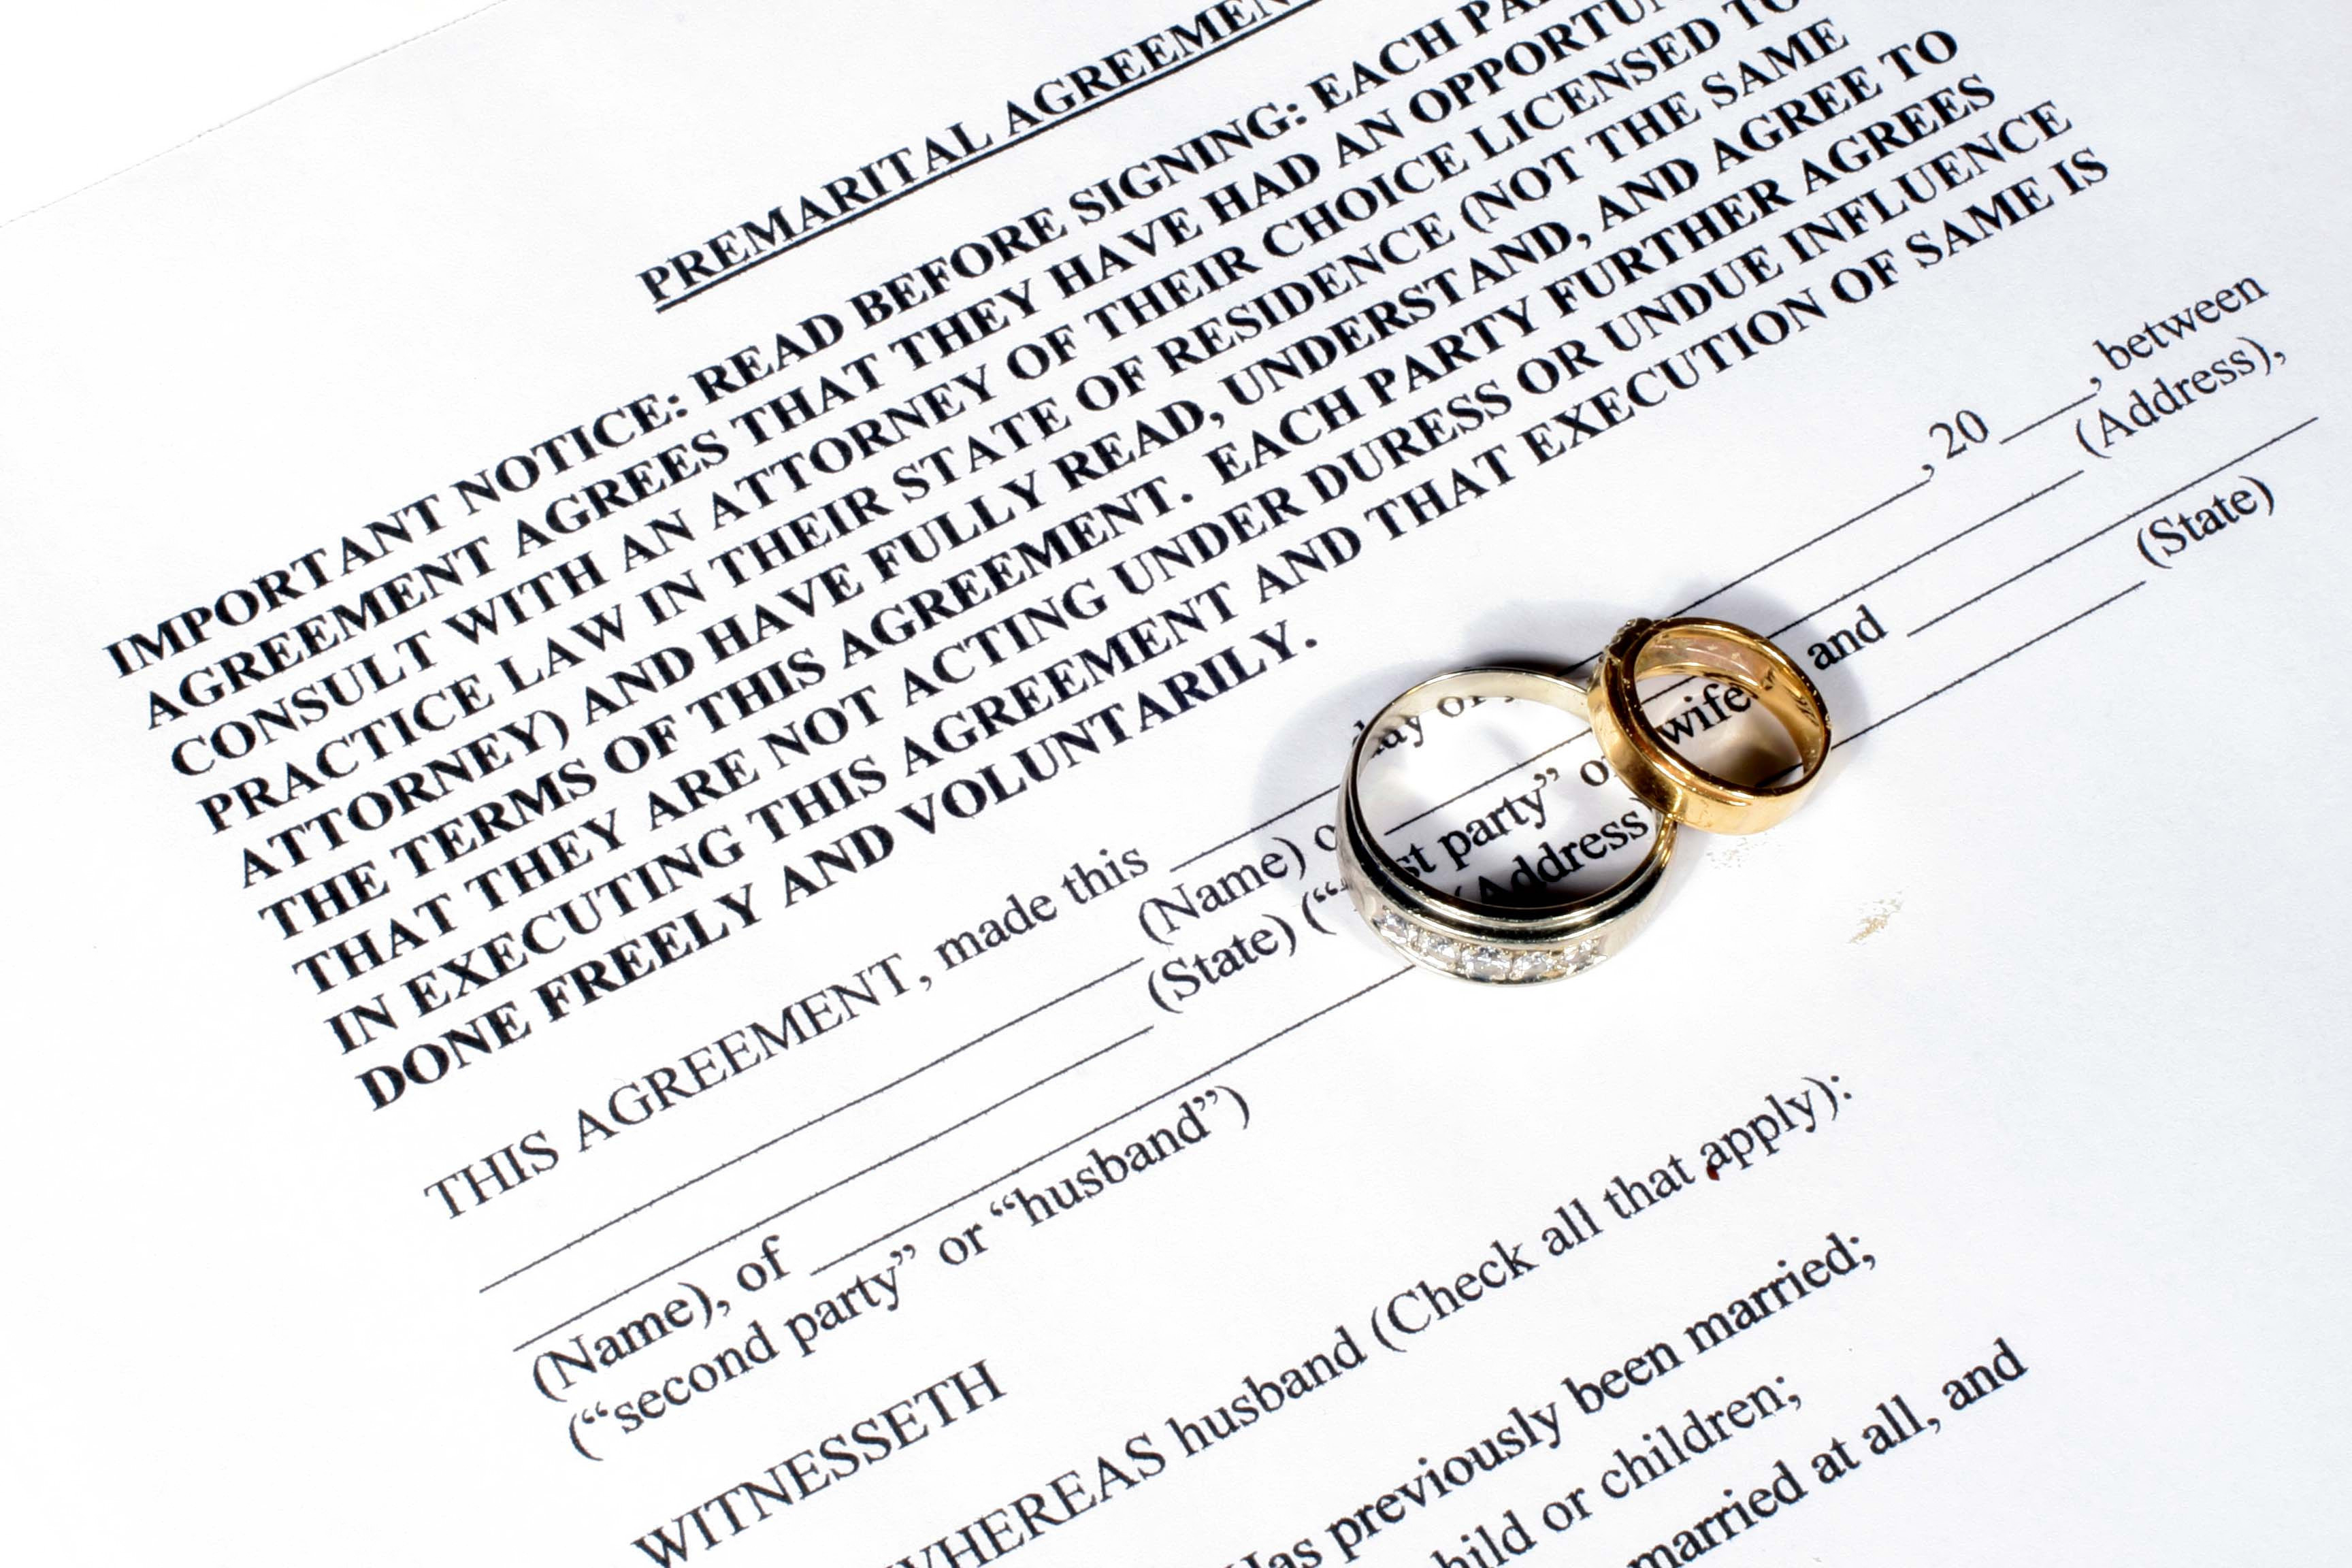 Signing An Agreement Under Duress Prenuptial Agreements A Boon Or A Curse Chugh